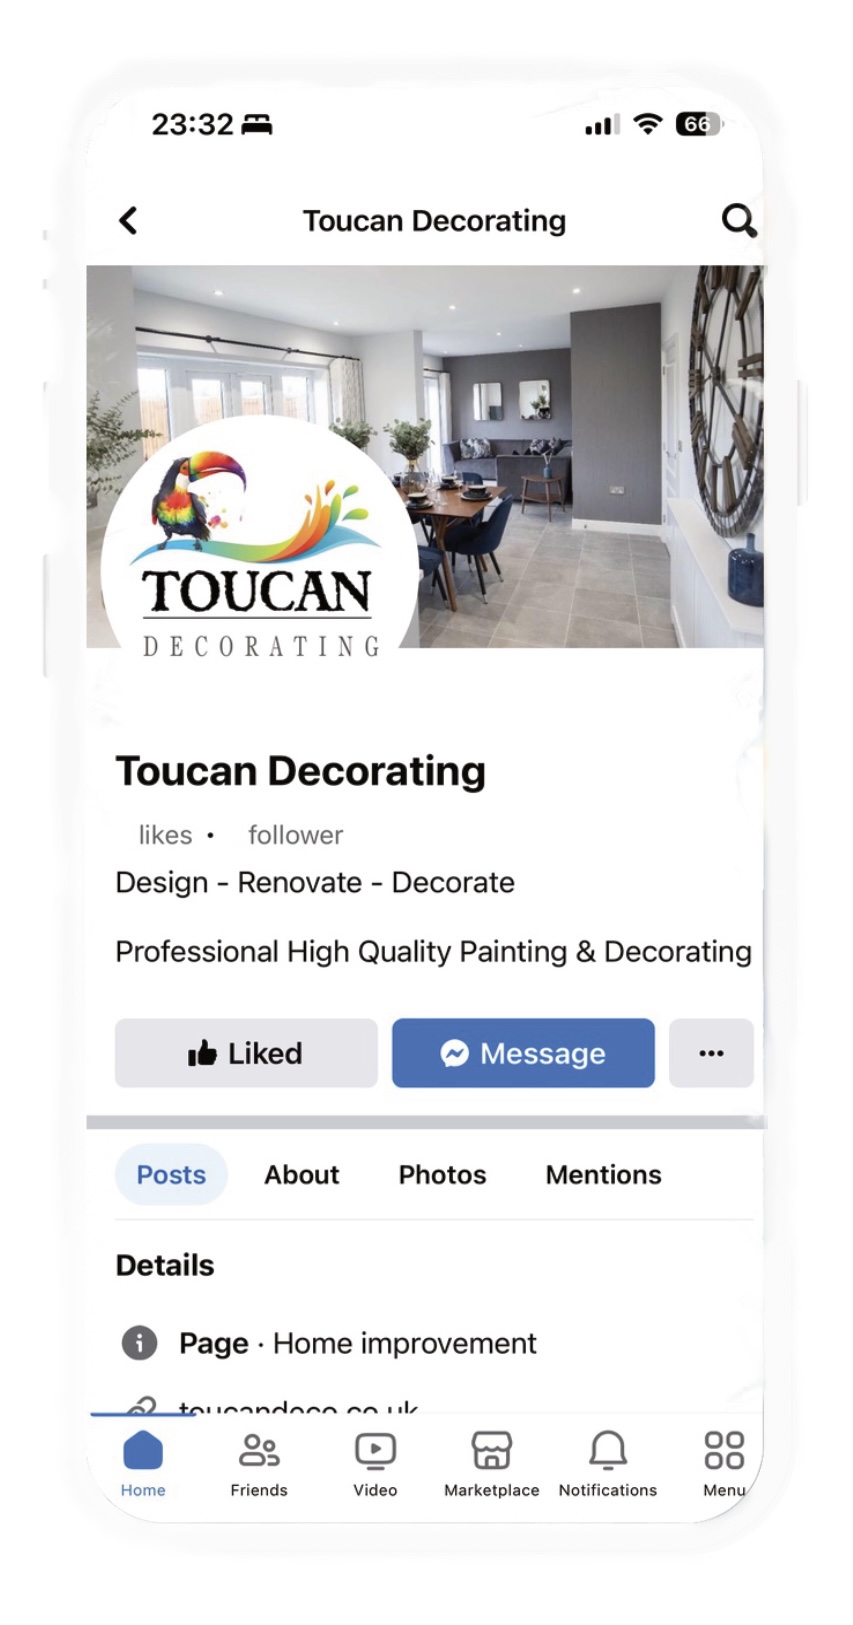 White mobile phone with Toucan Decorating contact information, logo and Facebook listing shown on the screen.